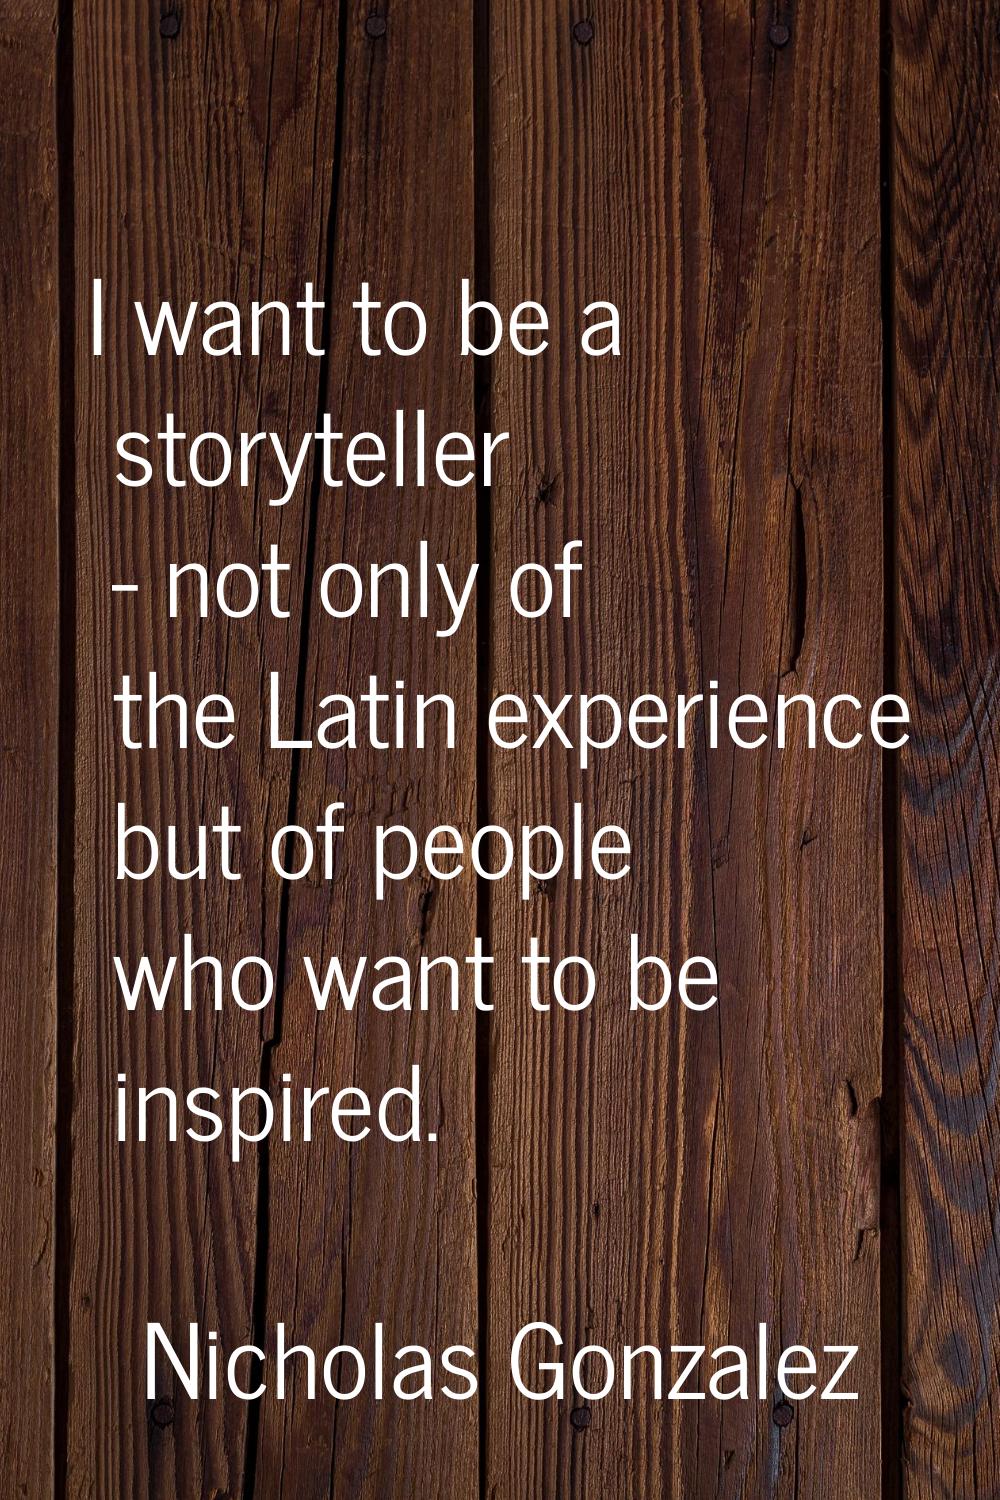 I want to be a storyteller - not only of the Latin experience but of people who want to be inspired